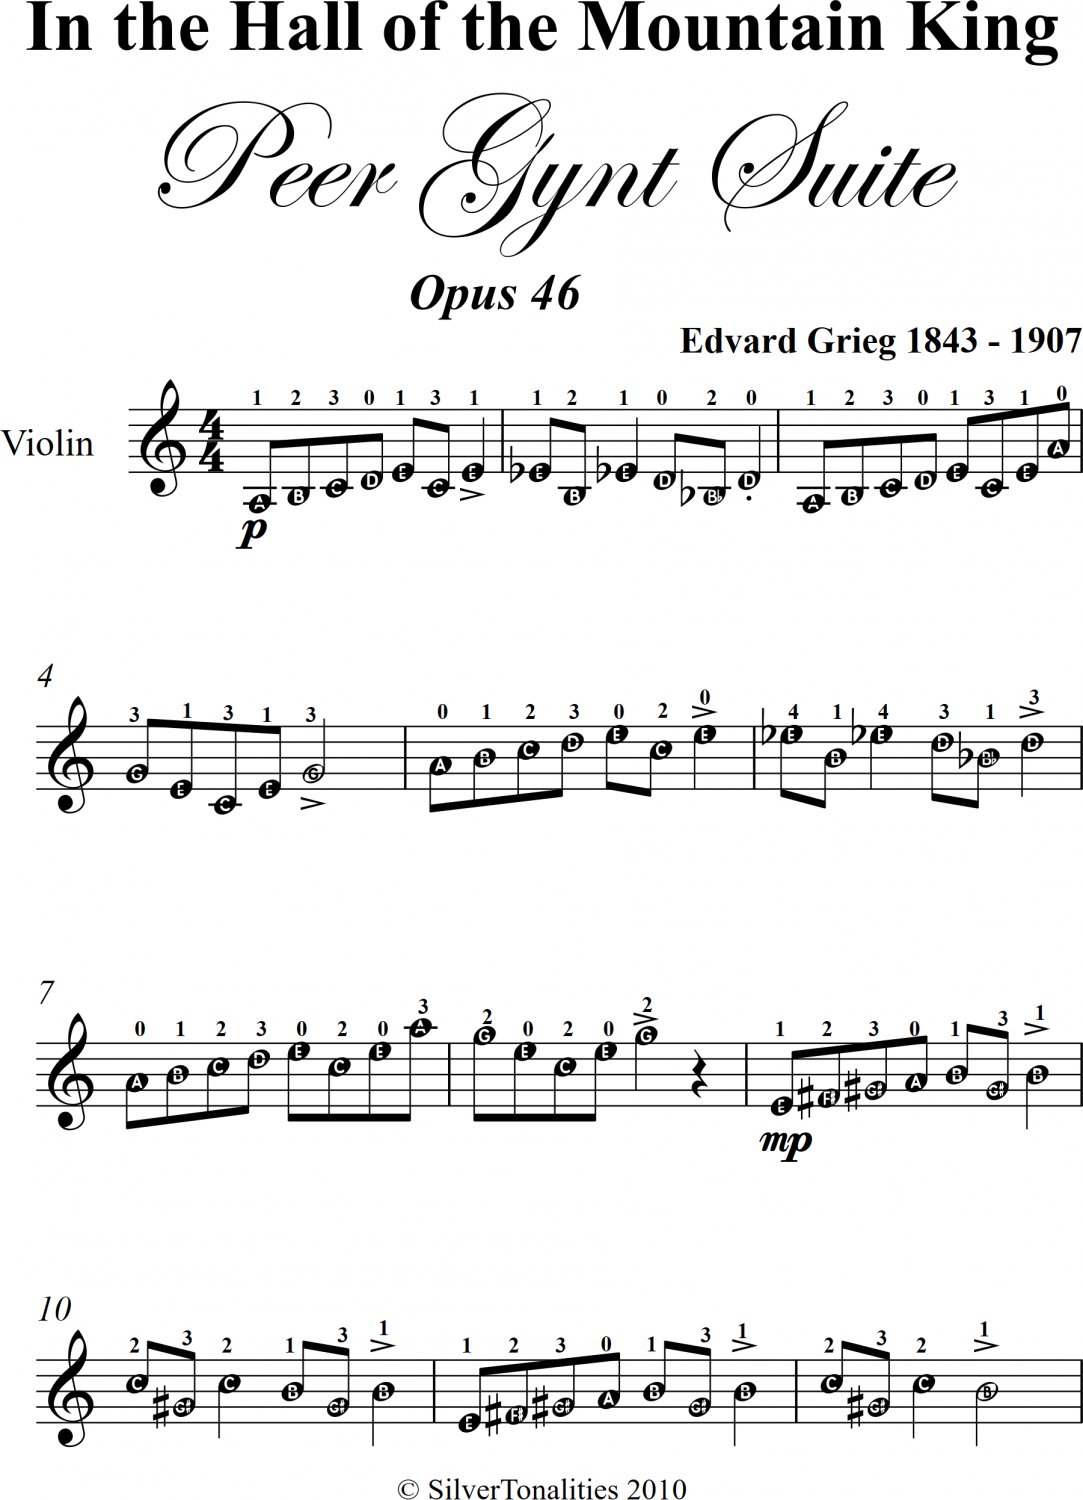 In the Hall of the Mountain King Easy Violin Sheet Music